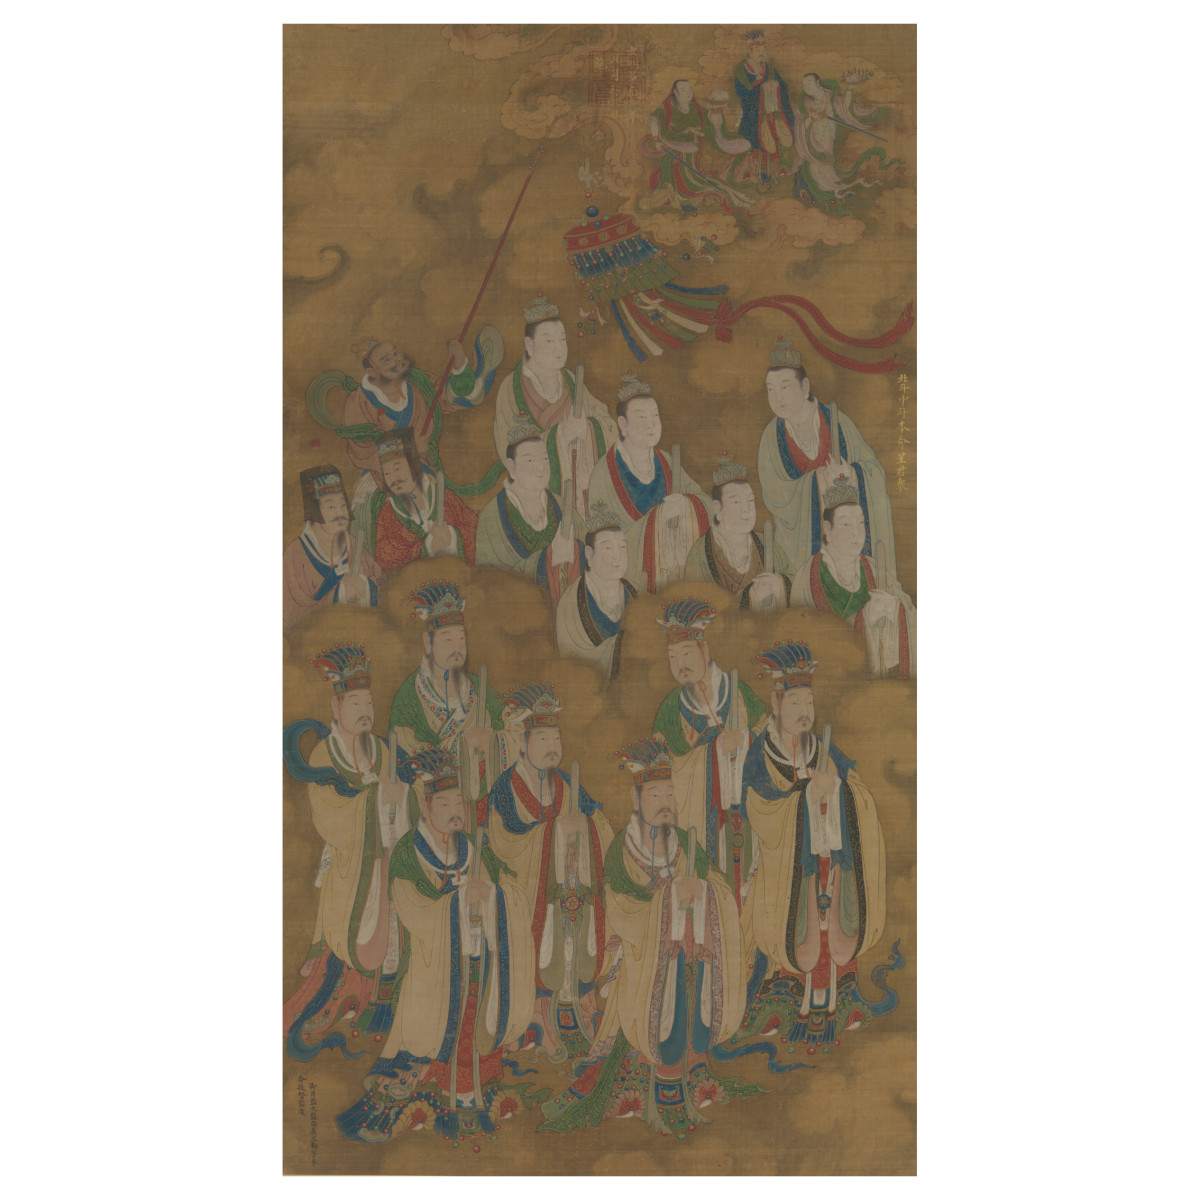 A Chinese painted scroll known as "Star deities of the northern and central dippers" - it dates to the 15th Century.